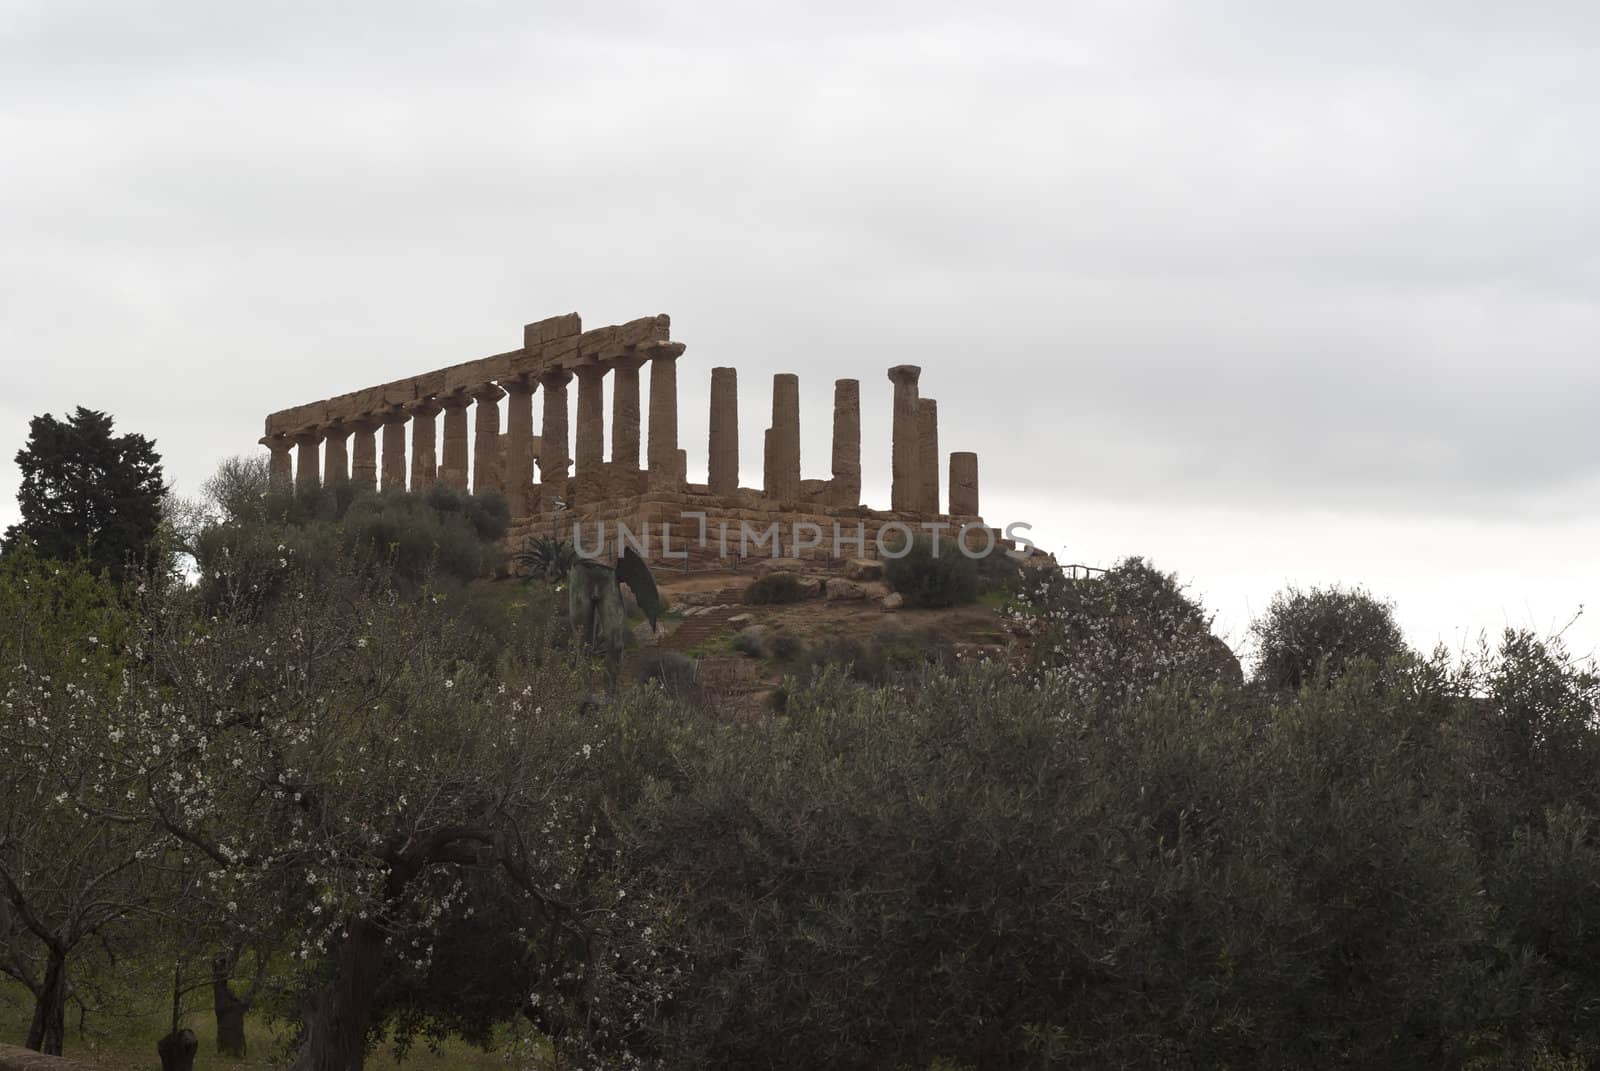  "Valle dei Templi"-  Valley of the temples, Agrigento, Sicily, Italy